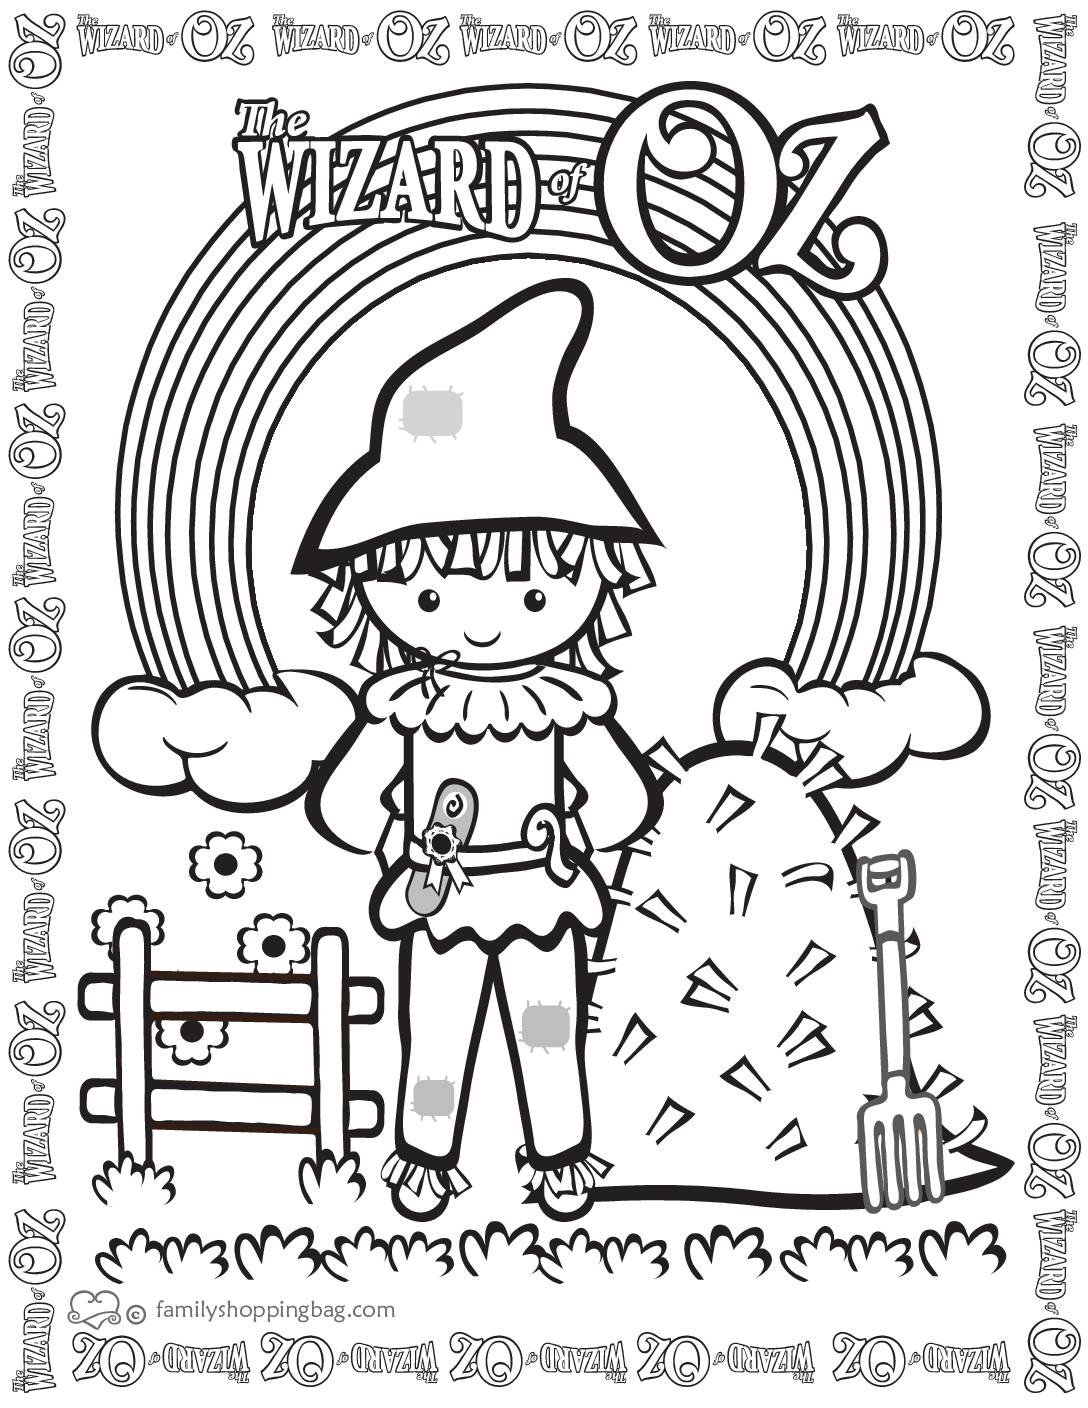 Coloring Page 8 Wizard of Oz